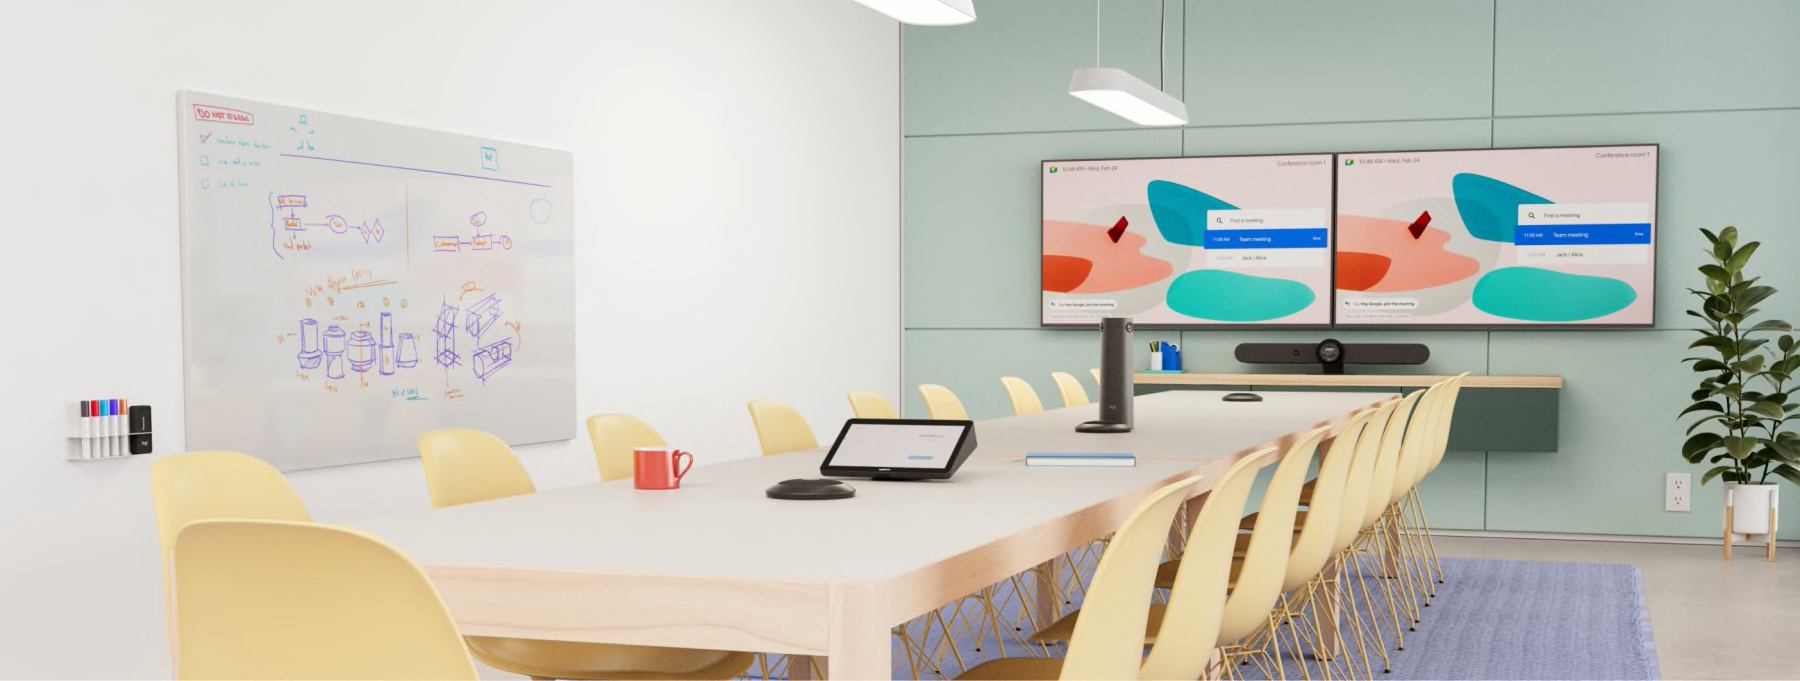 Google meet Solutions for boardroom space